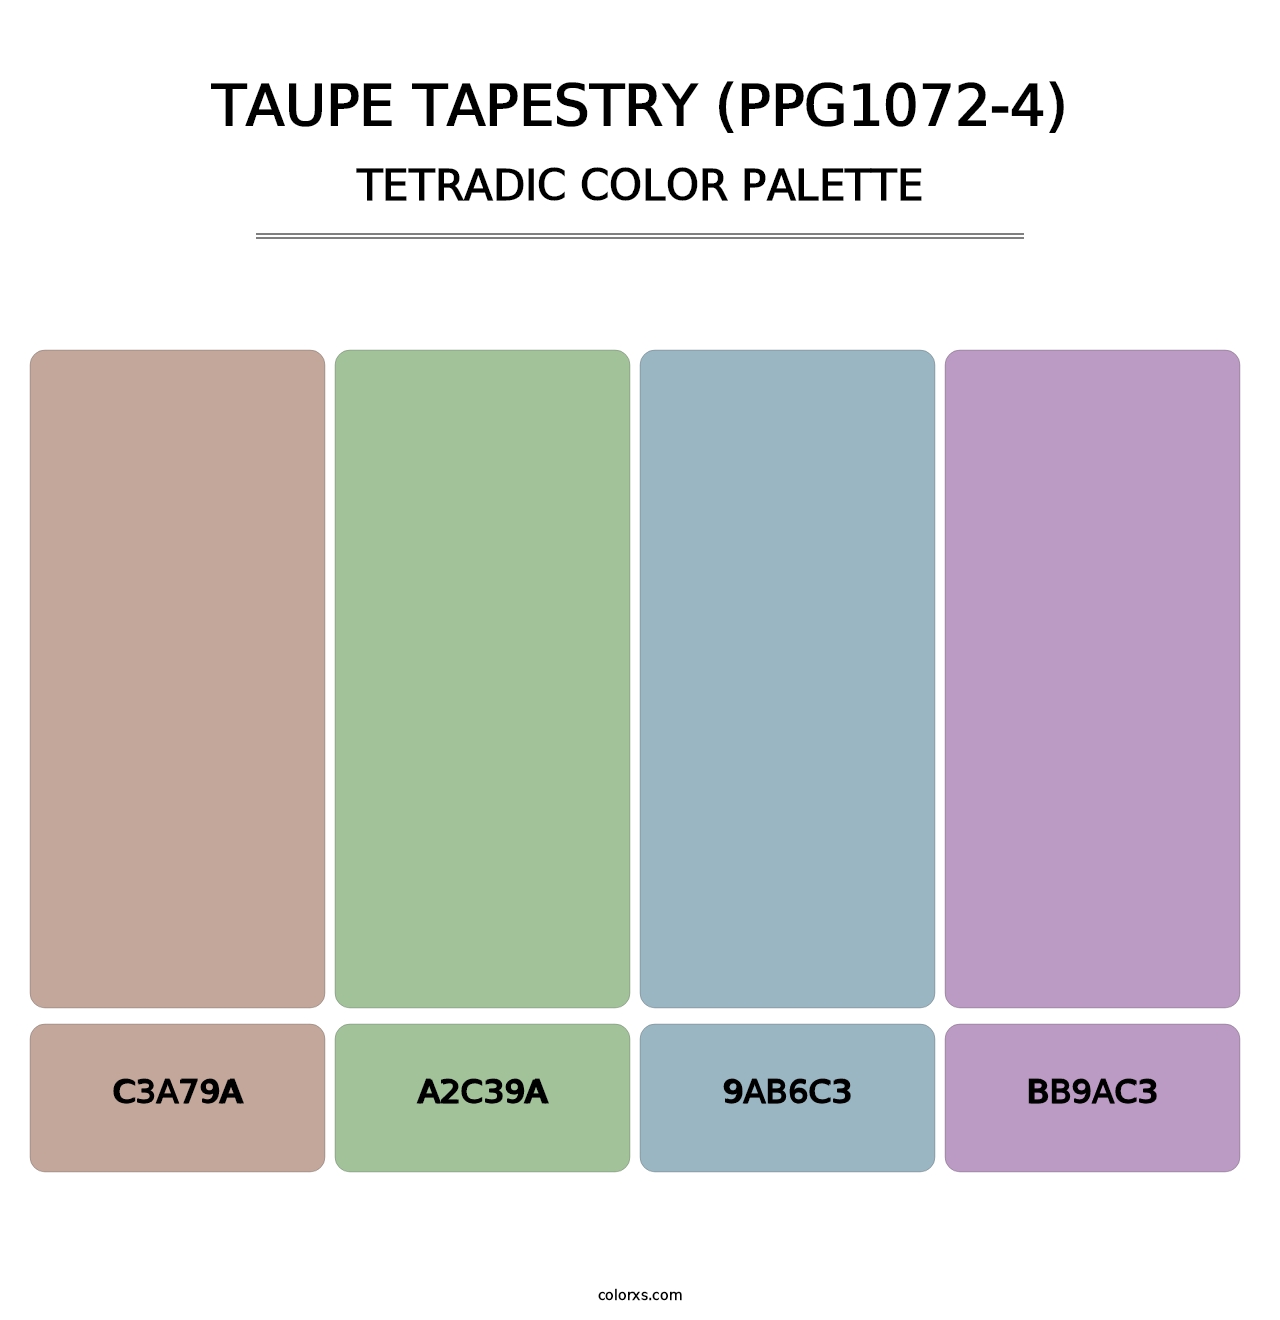 Taupe Tapestry (PPG1072-4) - Tetradic Color Palette